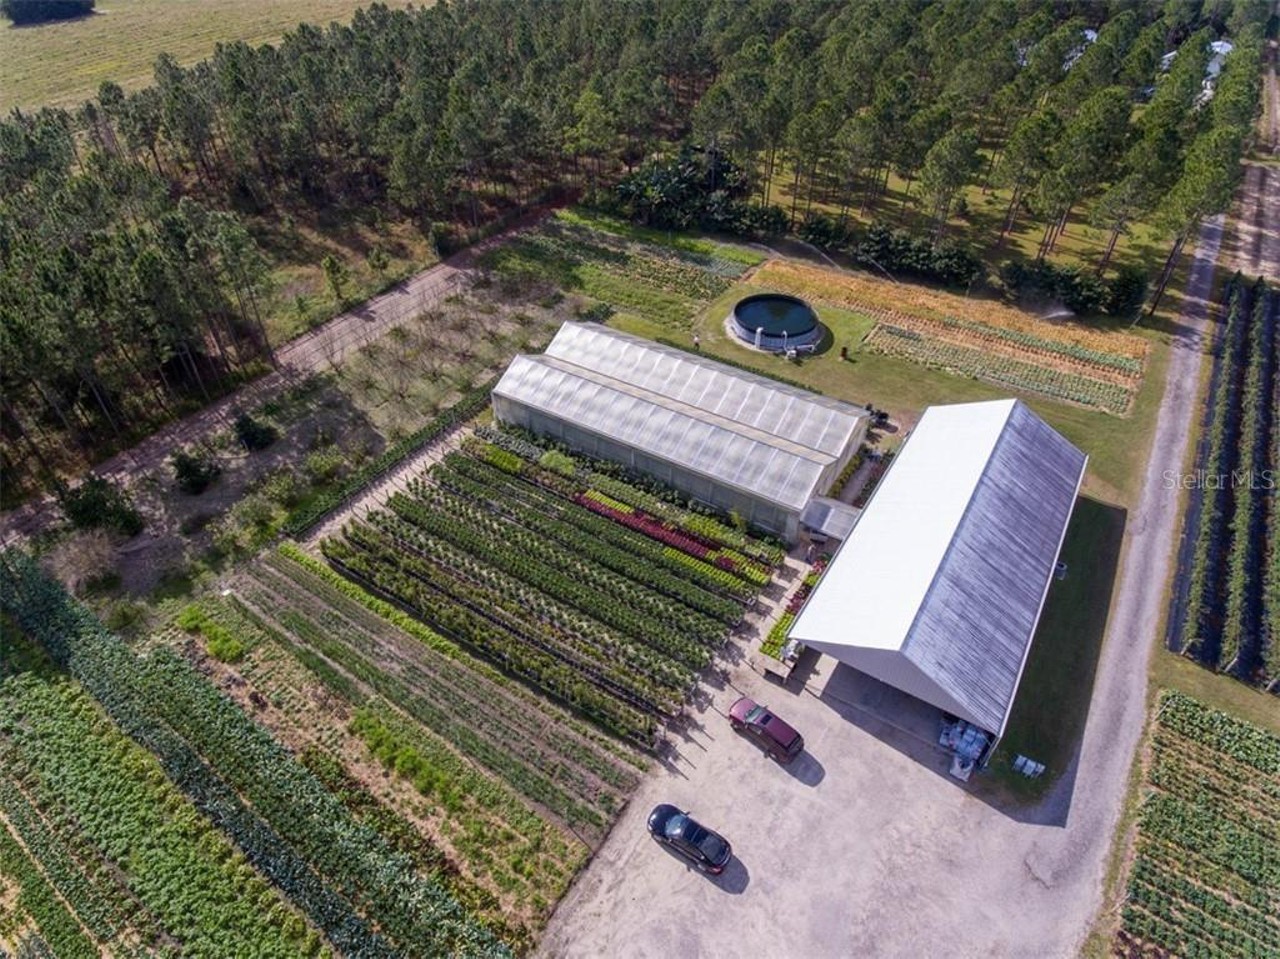 This Mount Dora farm house sits on a dreamy 10-acre working fruit and vegetable farm